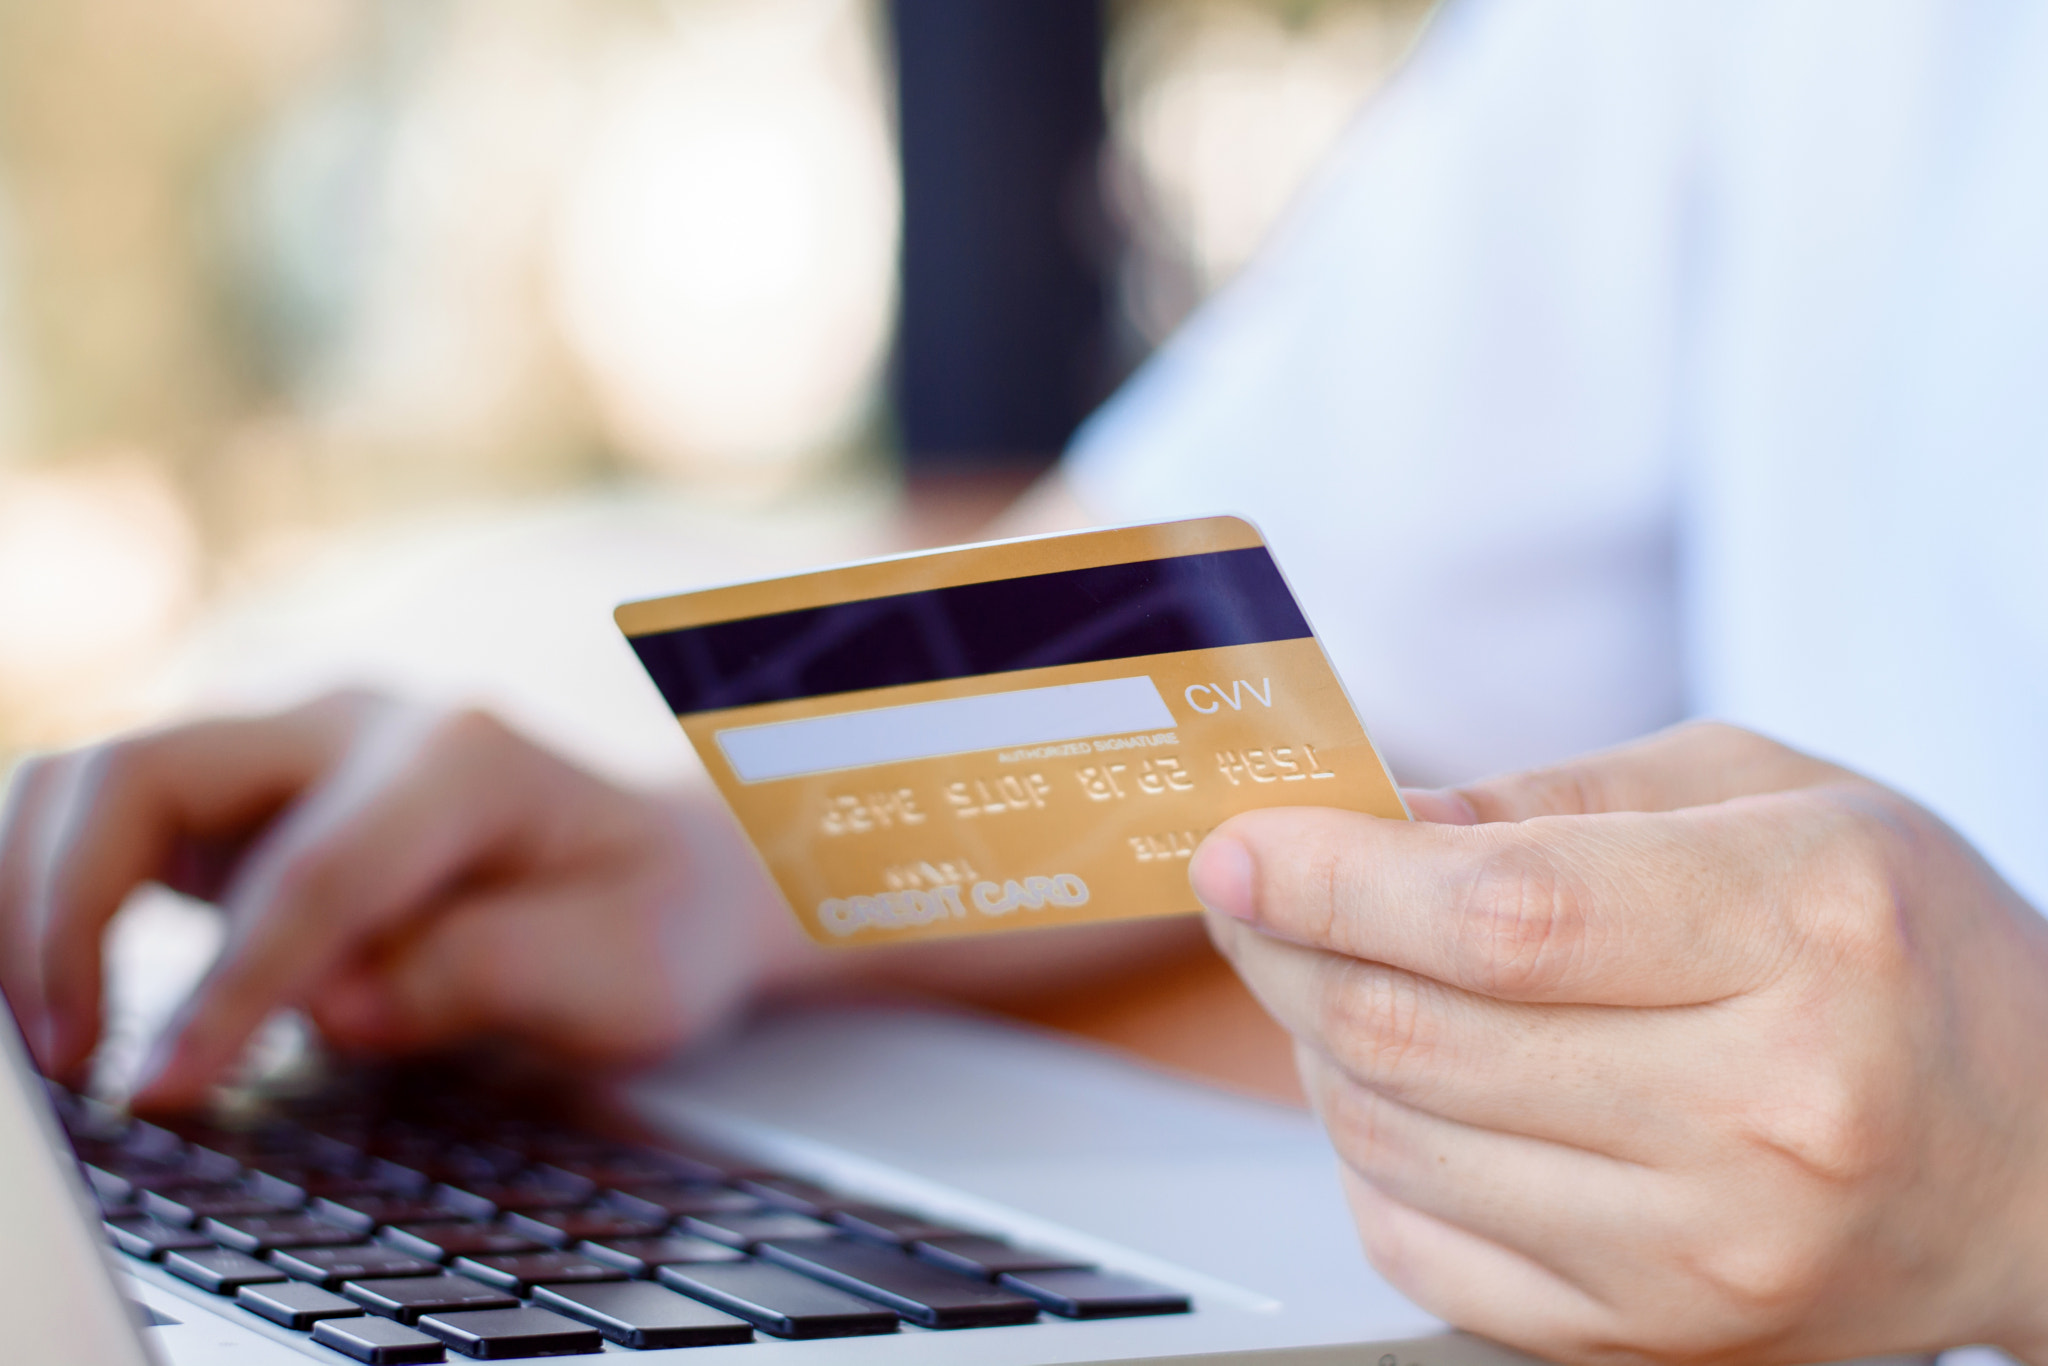 Online Payment . Woman hands holding credit card and using laptop. Online shopping